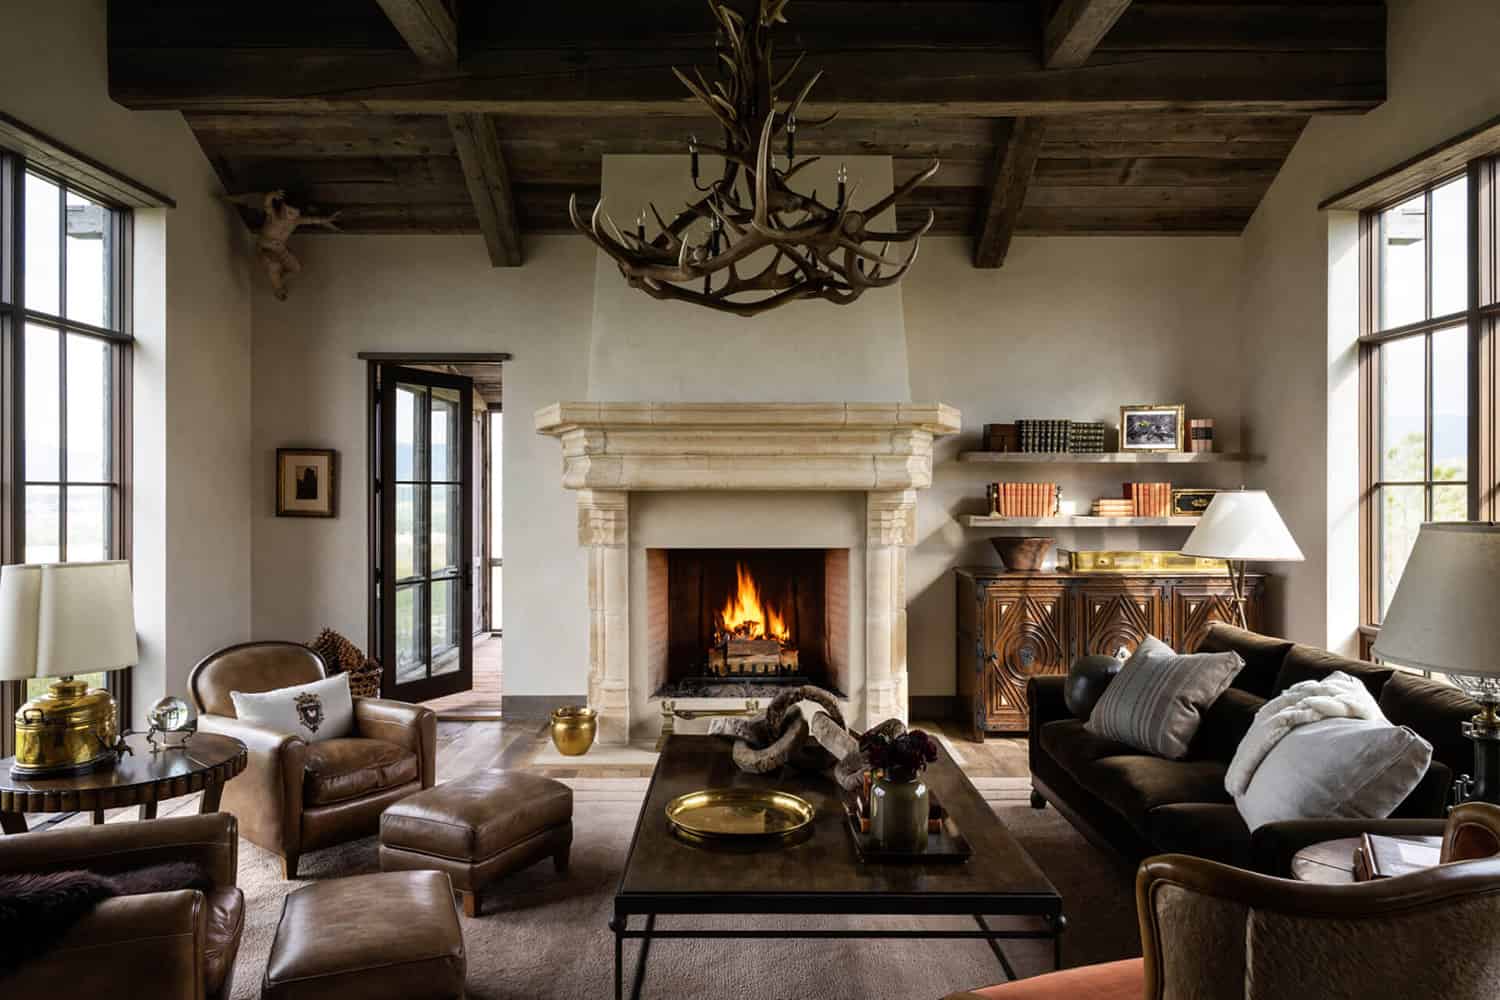 Step inside this inviting ranch house with cozy interiors in Montana